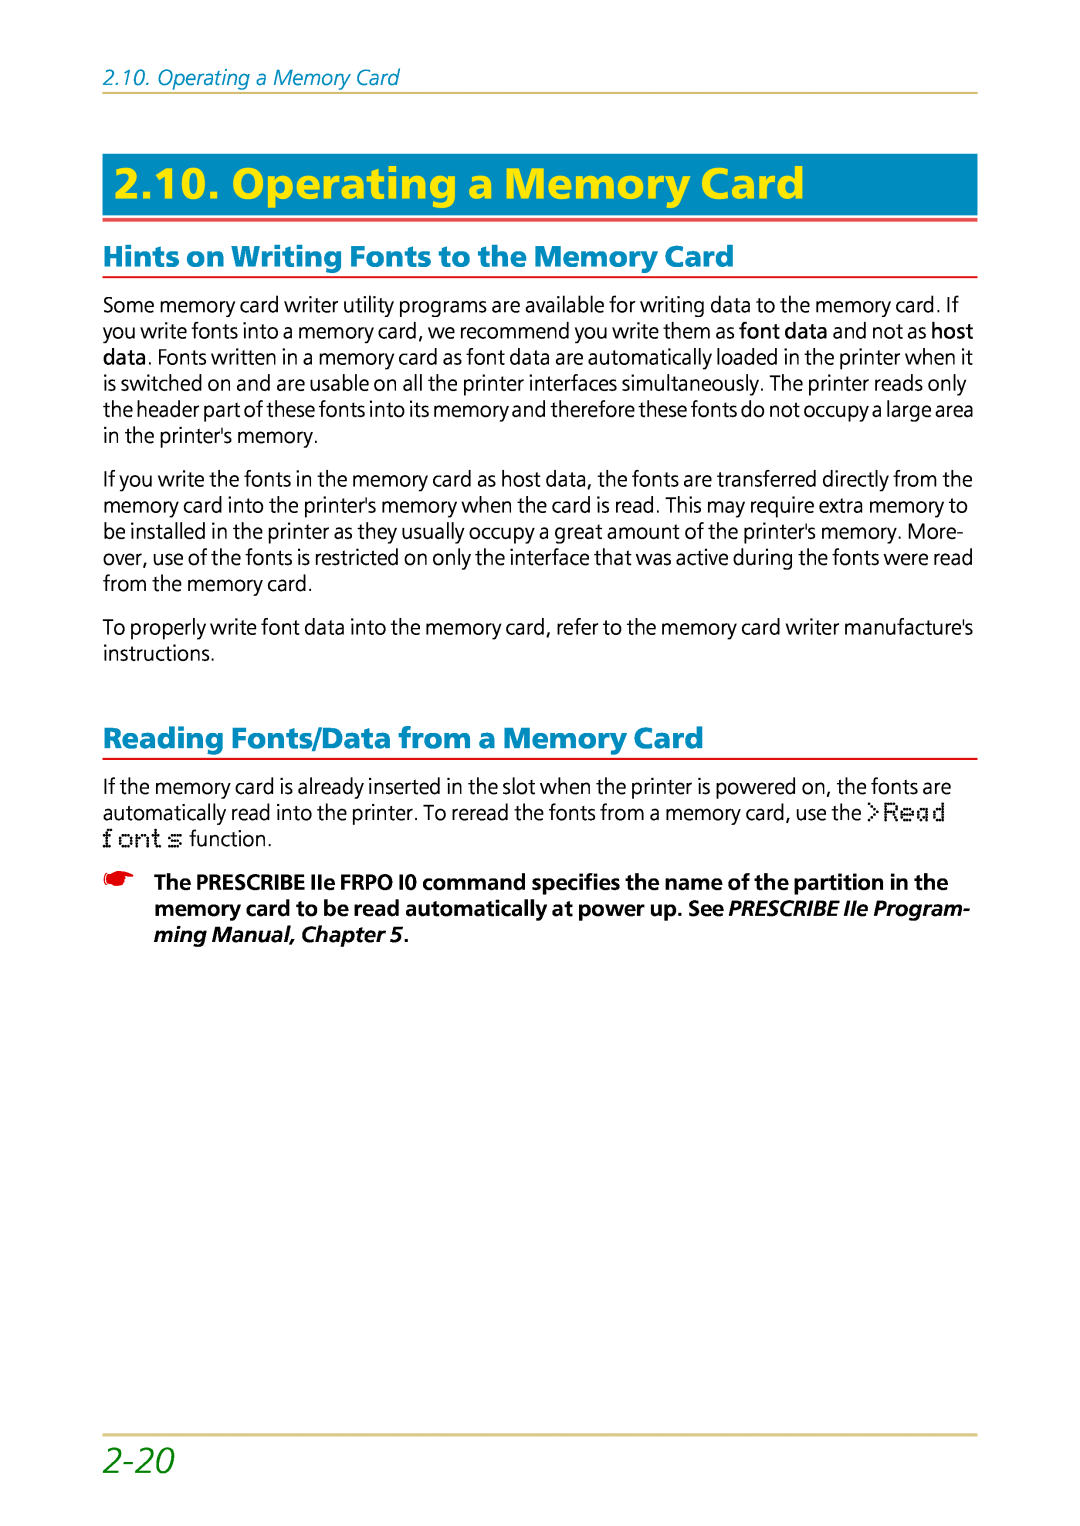 Kyocera FS-1700 user manual Operating a Memory Card, 2-20, Hints on Writing Fonts to the Memory Card 